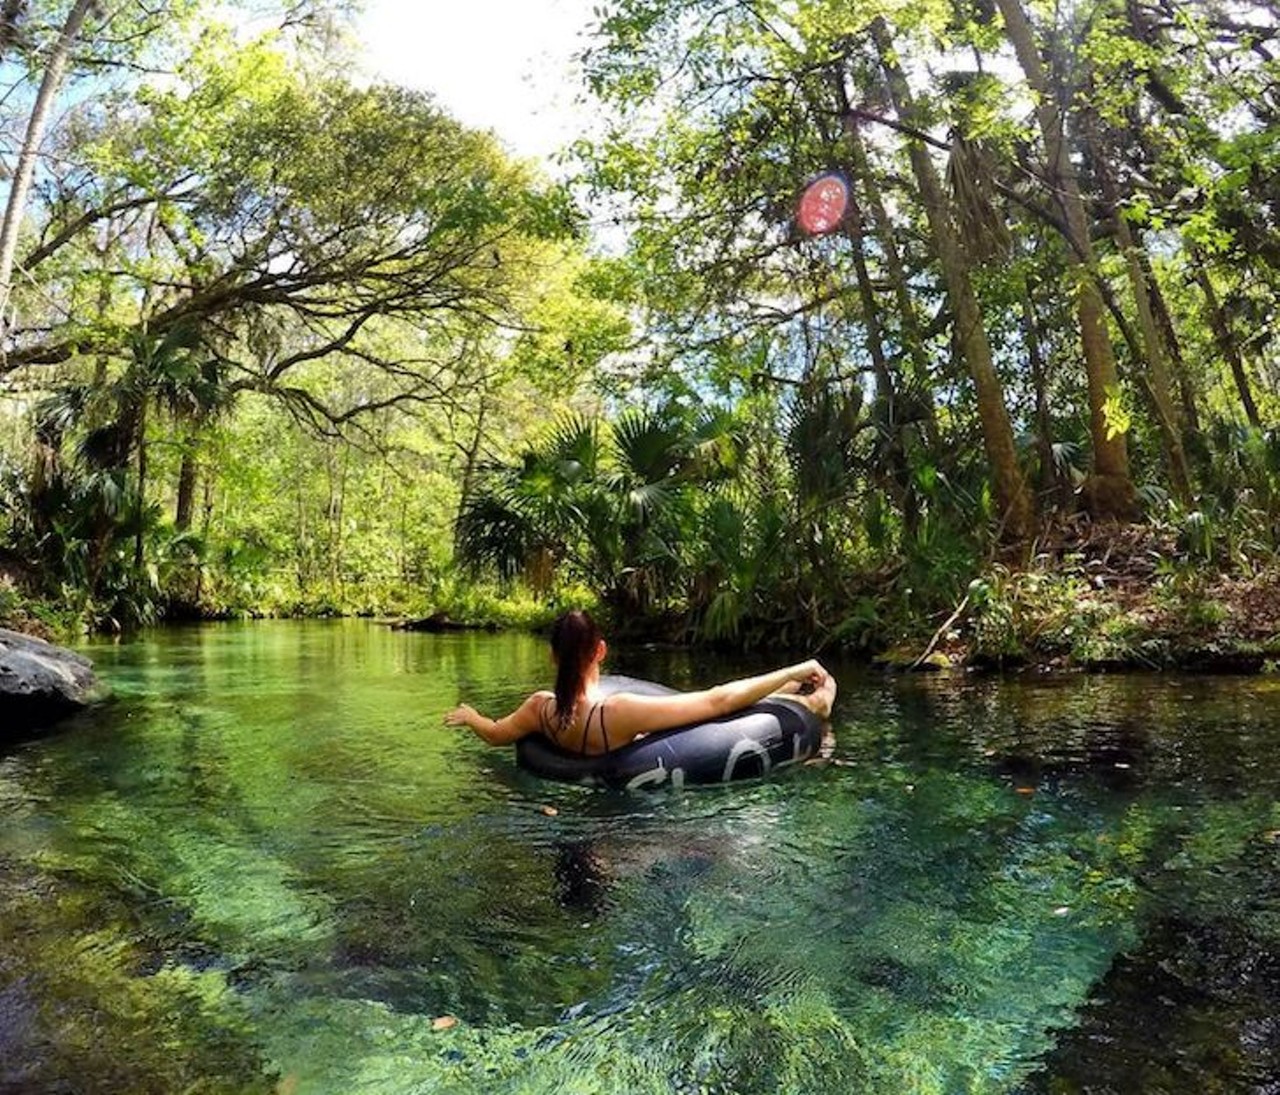 Rock Springs Run at Kelly Springs
400 E. Kelly Park Road, Apopka, 407-254-1902
Distance: About 35 minutes from Orlando
Photo via charty32/Instagram